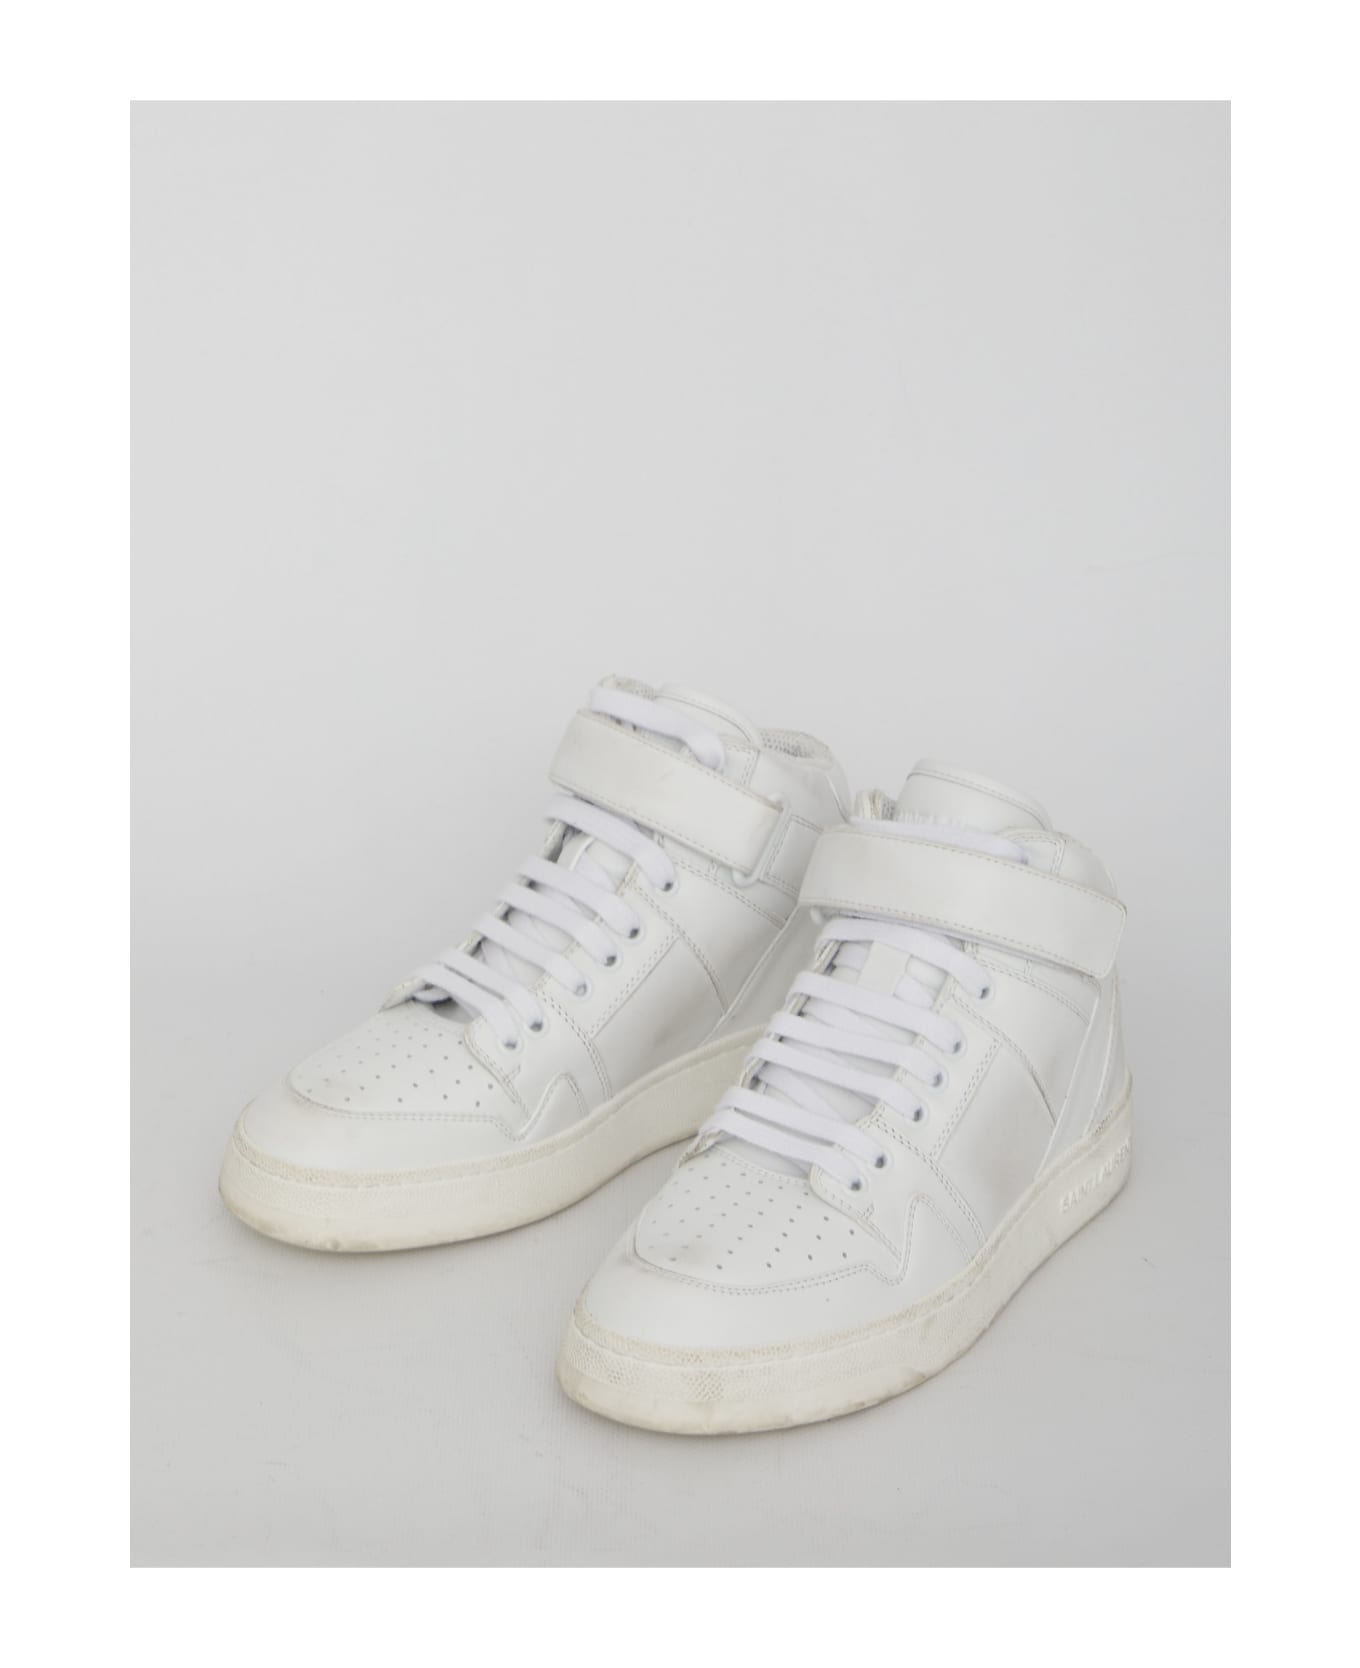 Saint Laurent Lax Sneakers In Washed-out Effect Leather - WHITE スニーカー